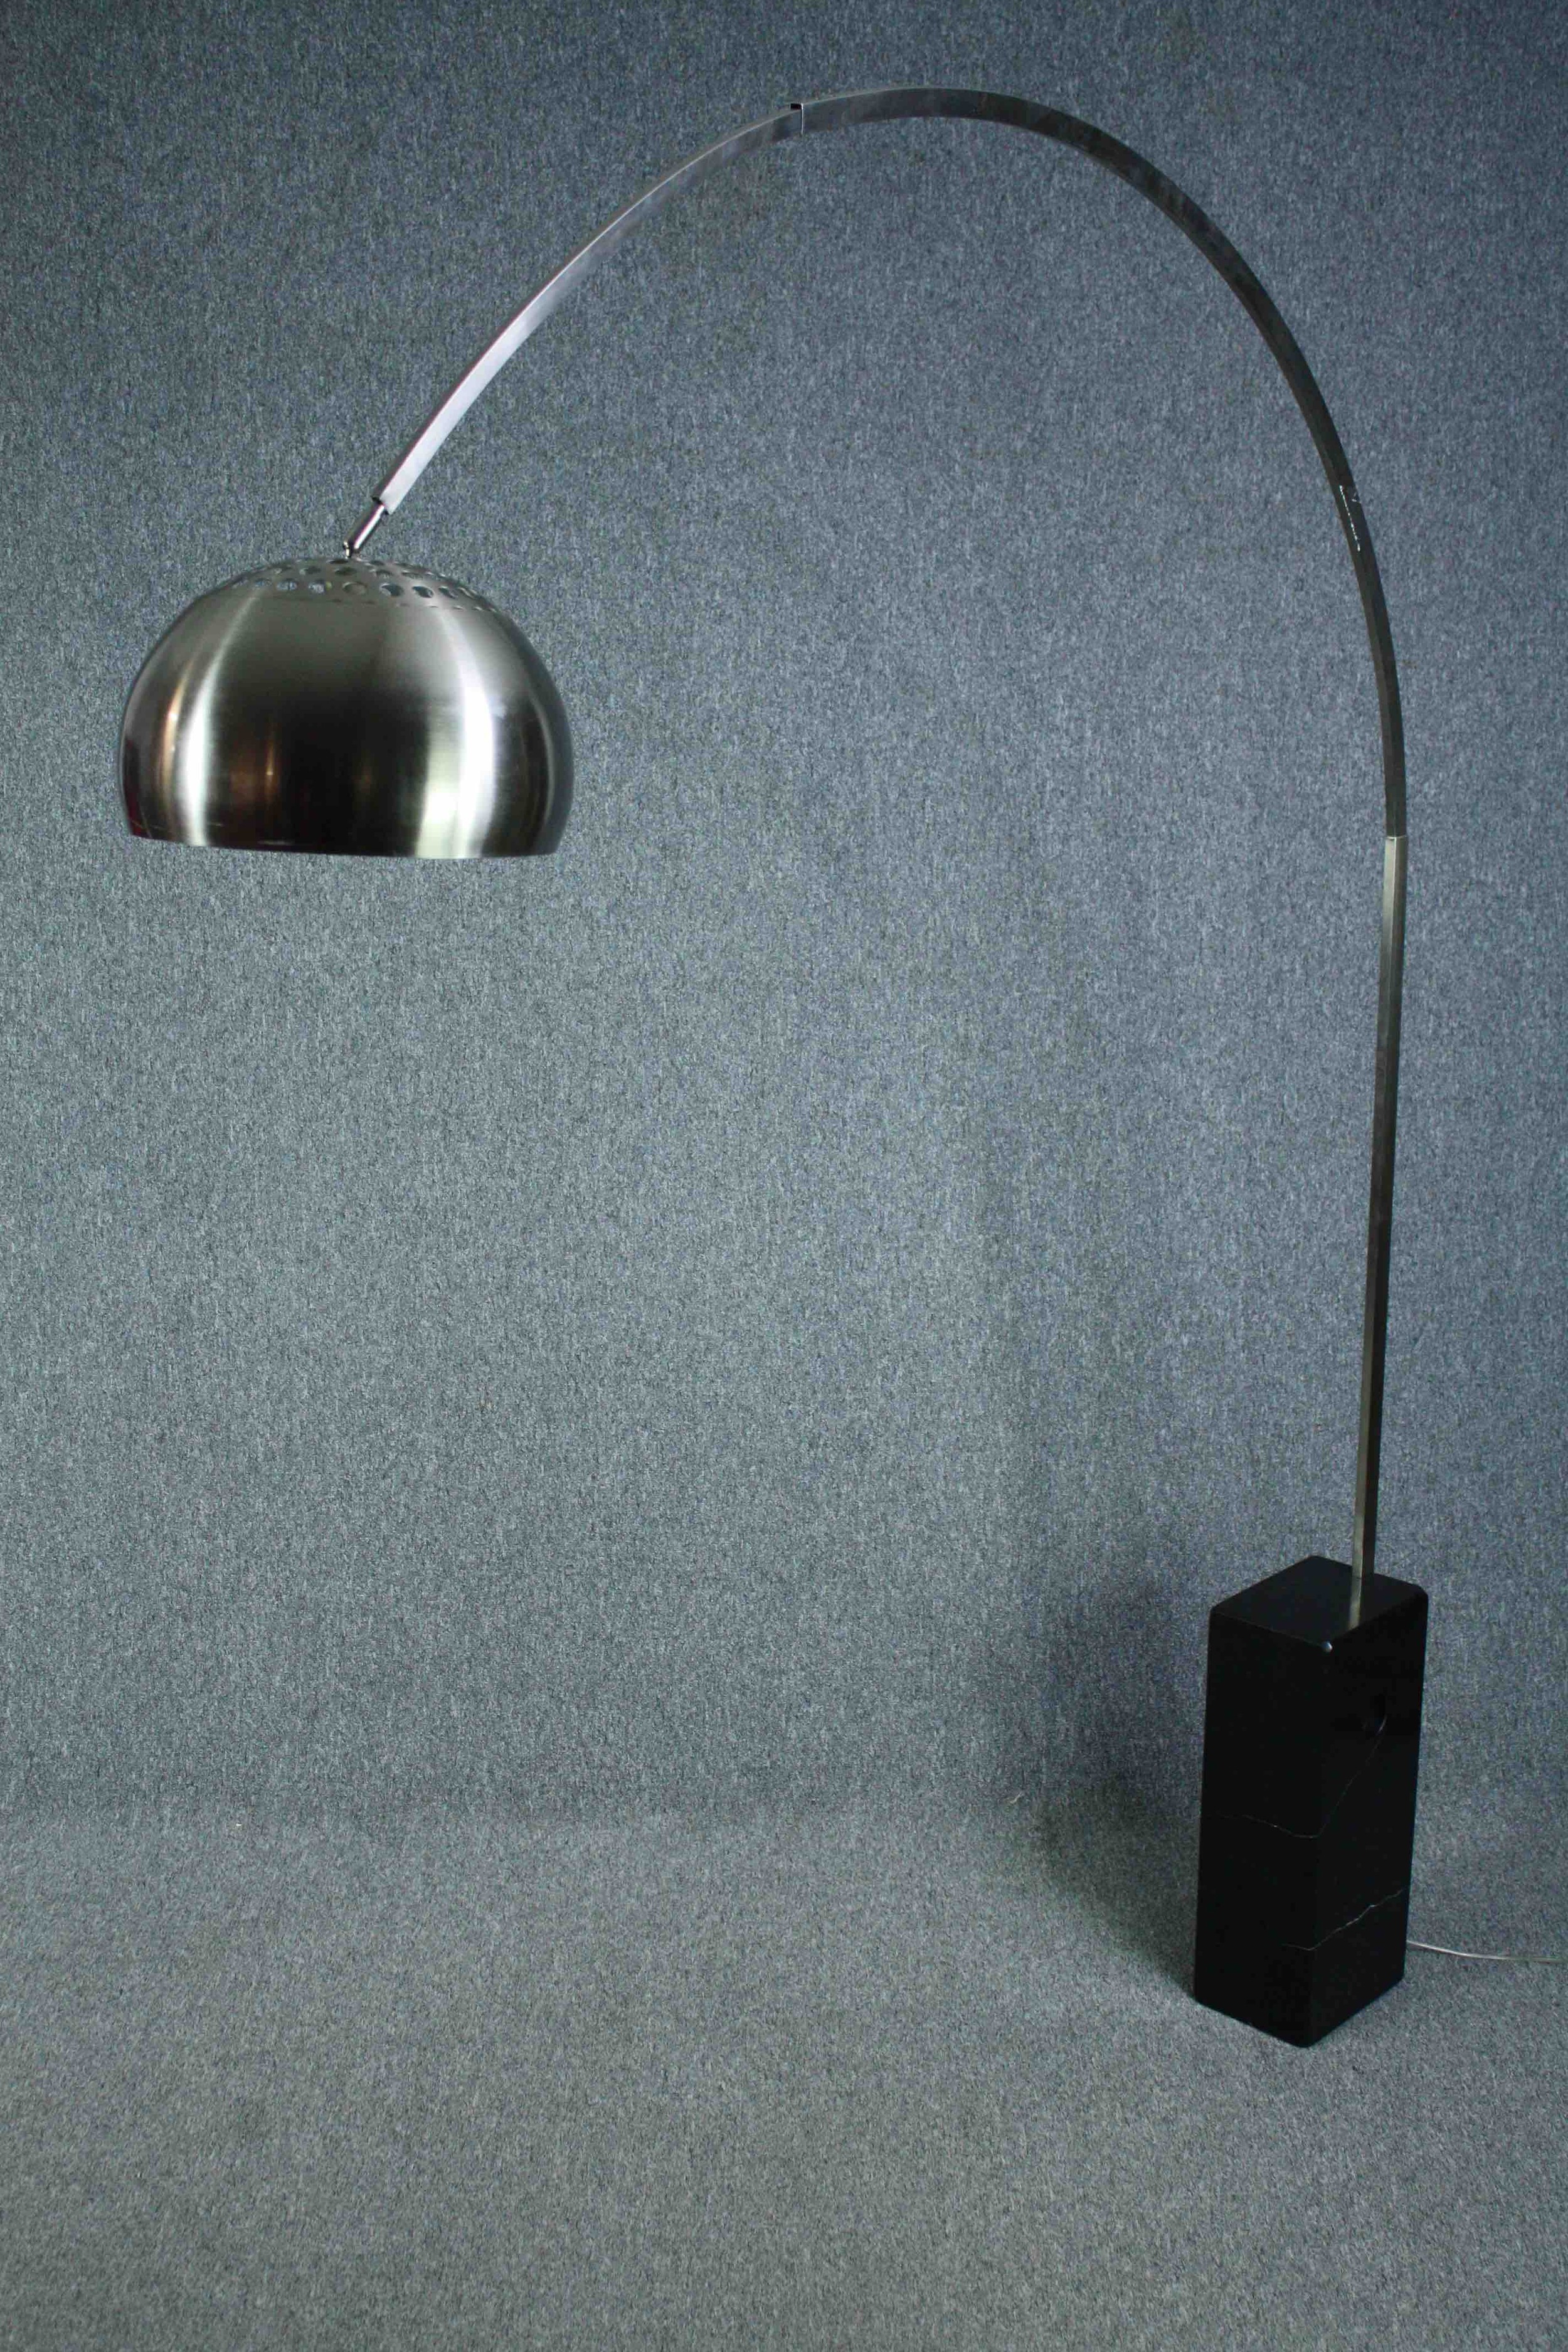 Conran. Arc lamp, Achille Castiglioni for Flos "Arco" lamp, chrome on white veined black marble - Image 3 of 7